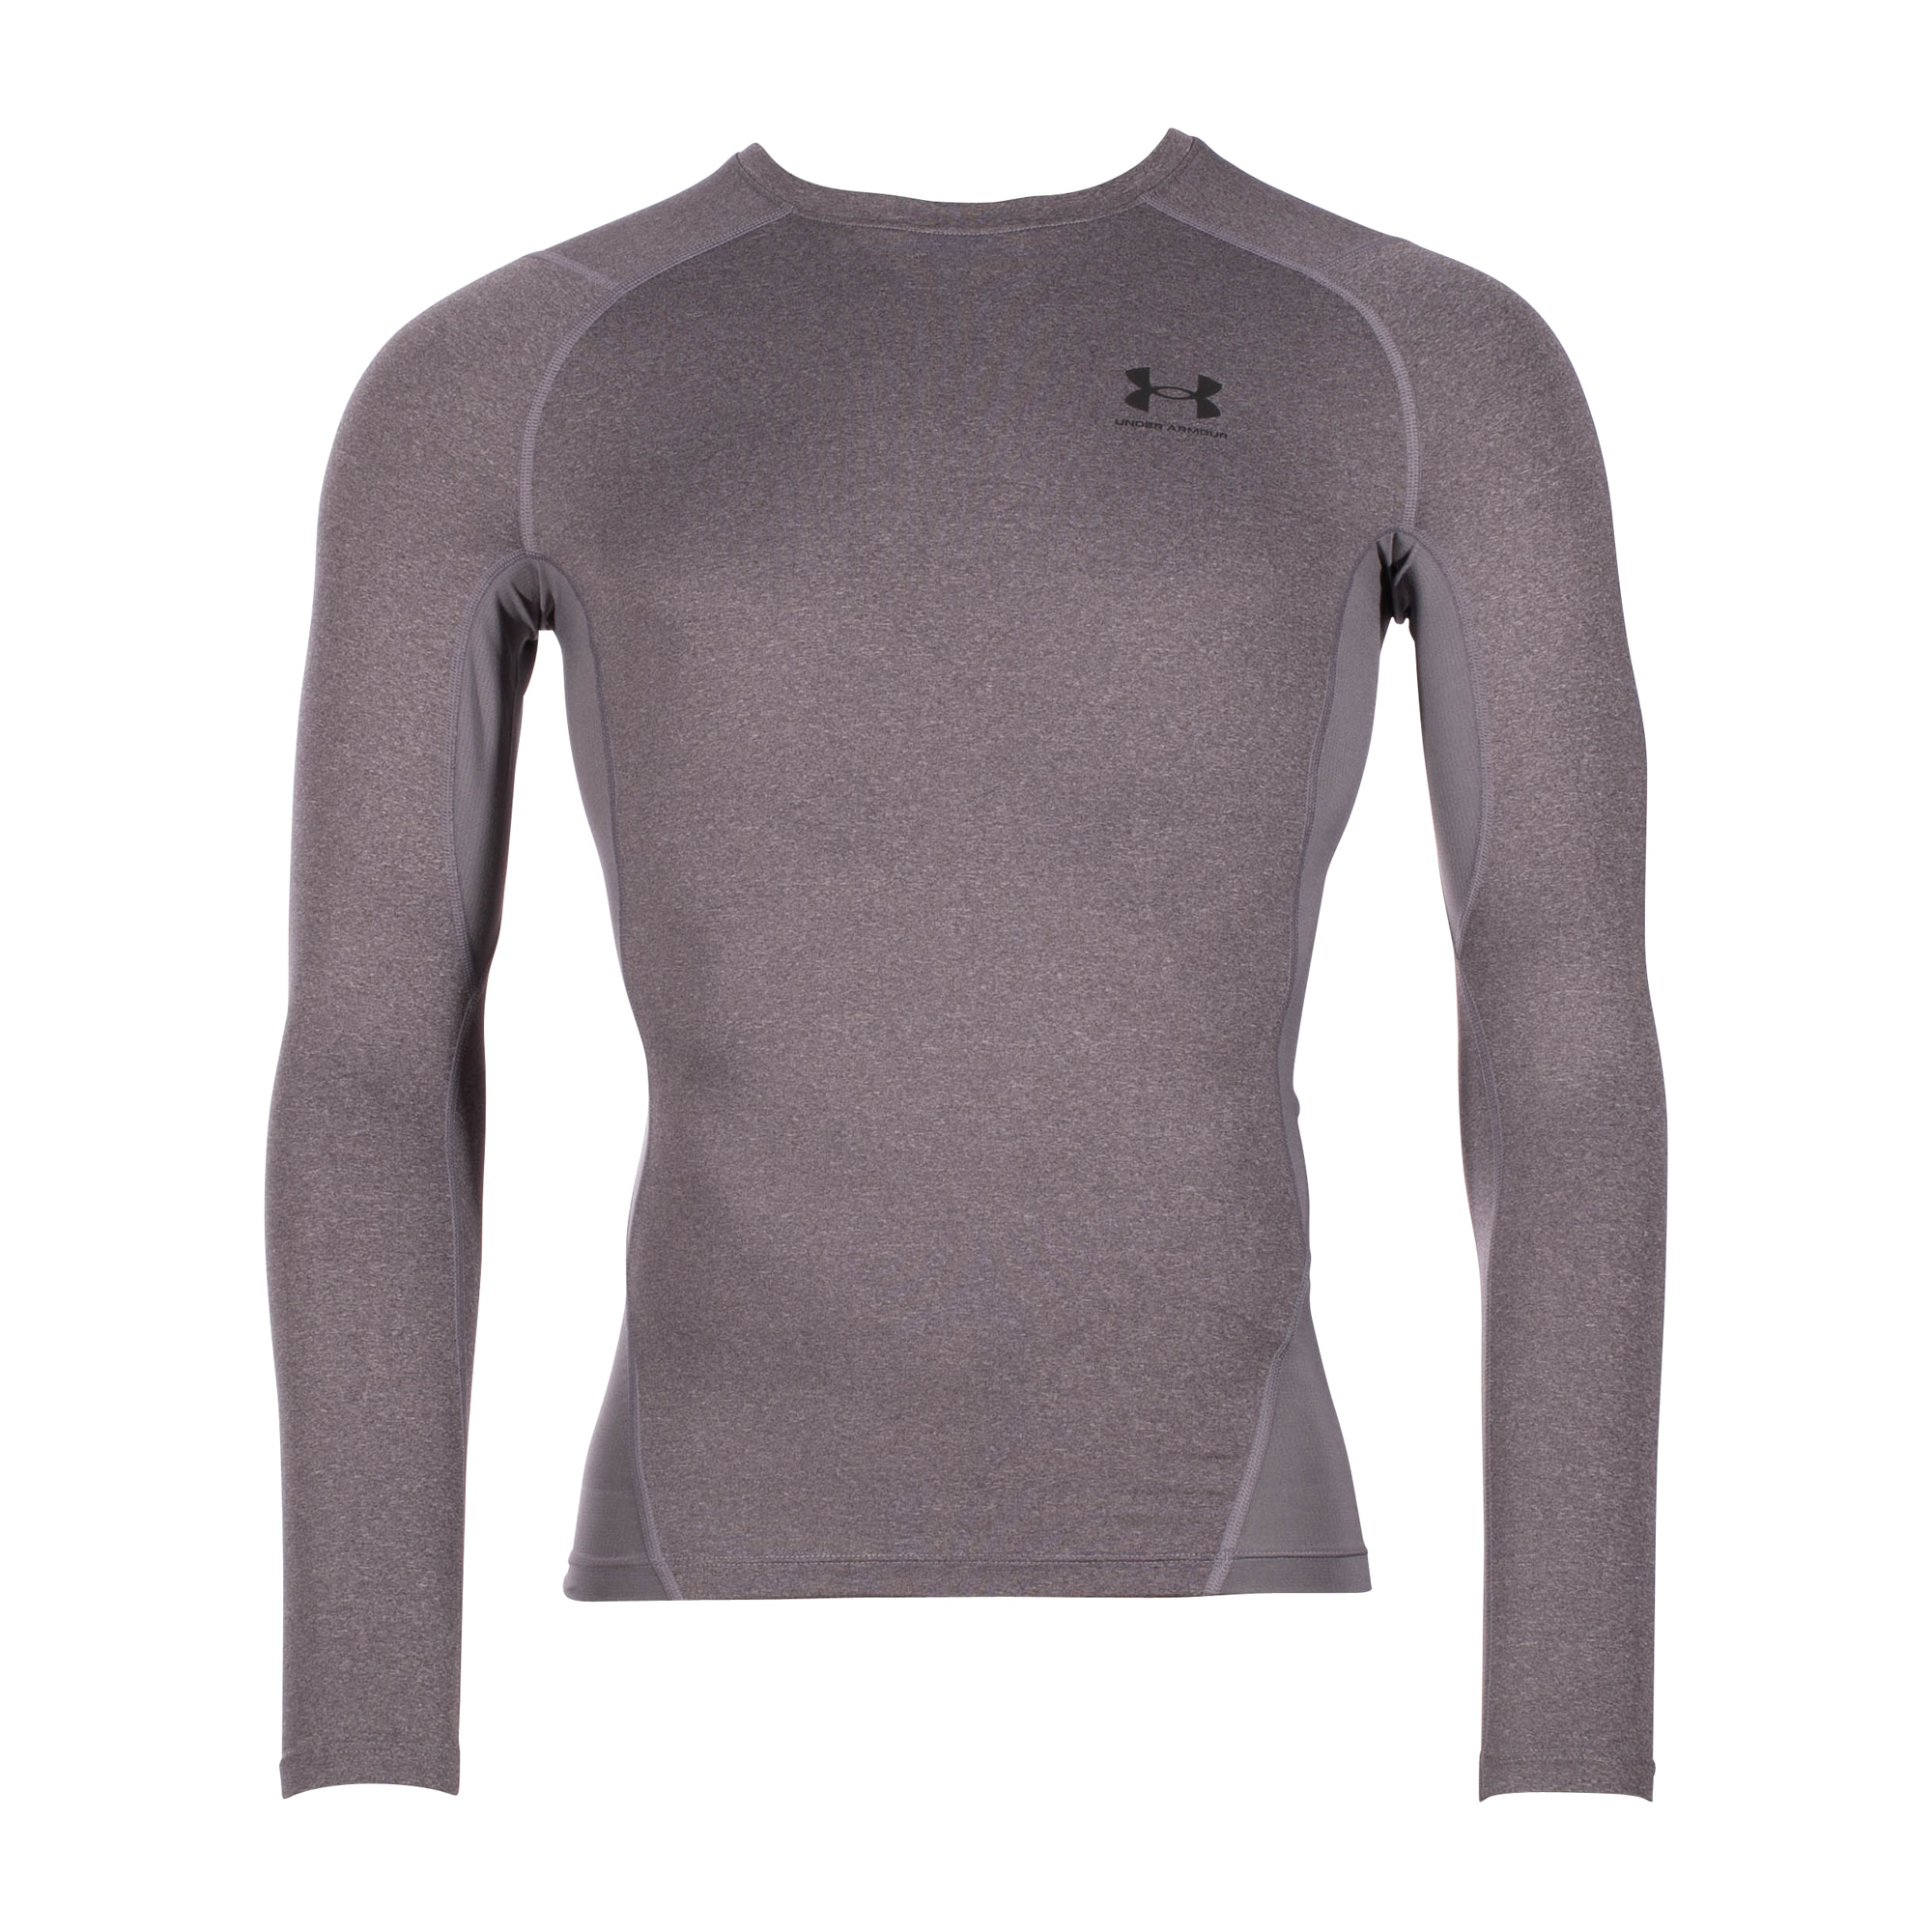 Purchase the Under Armour Shirt HG Armour Comp LS carbon heather